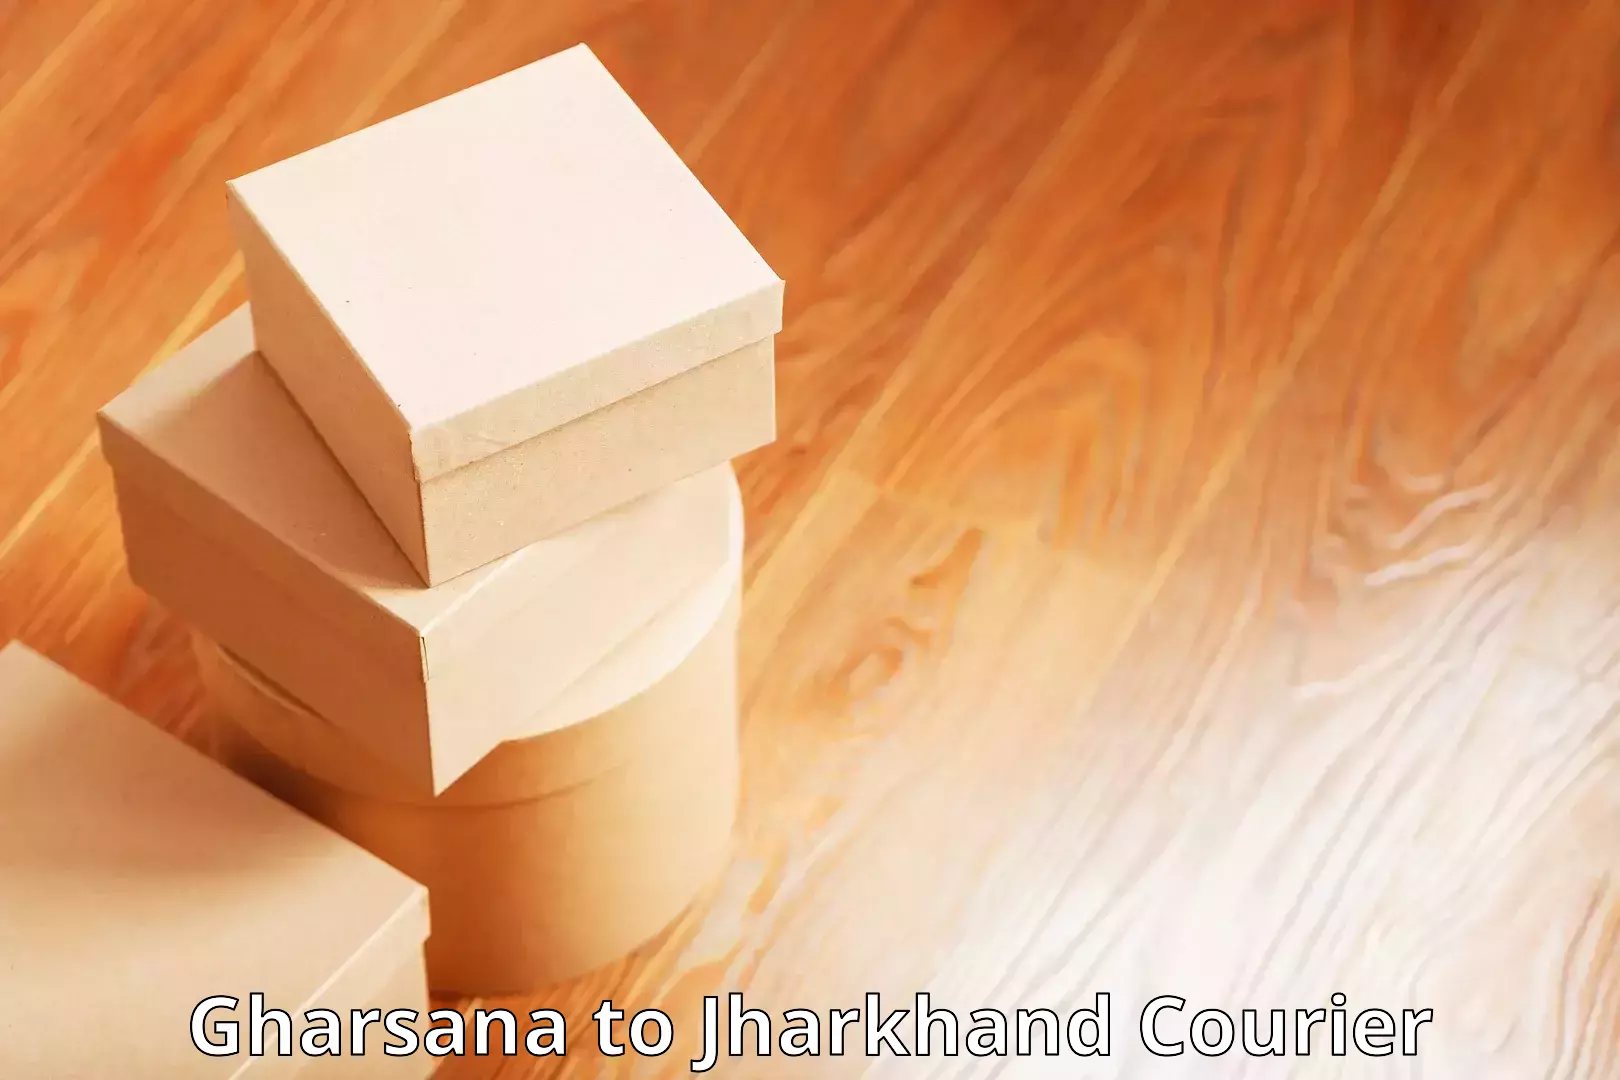 State-of-the-art courier technology Gharsana to Domchanch